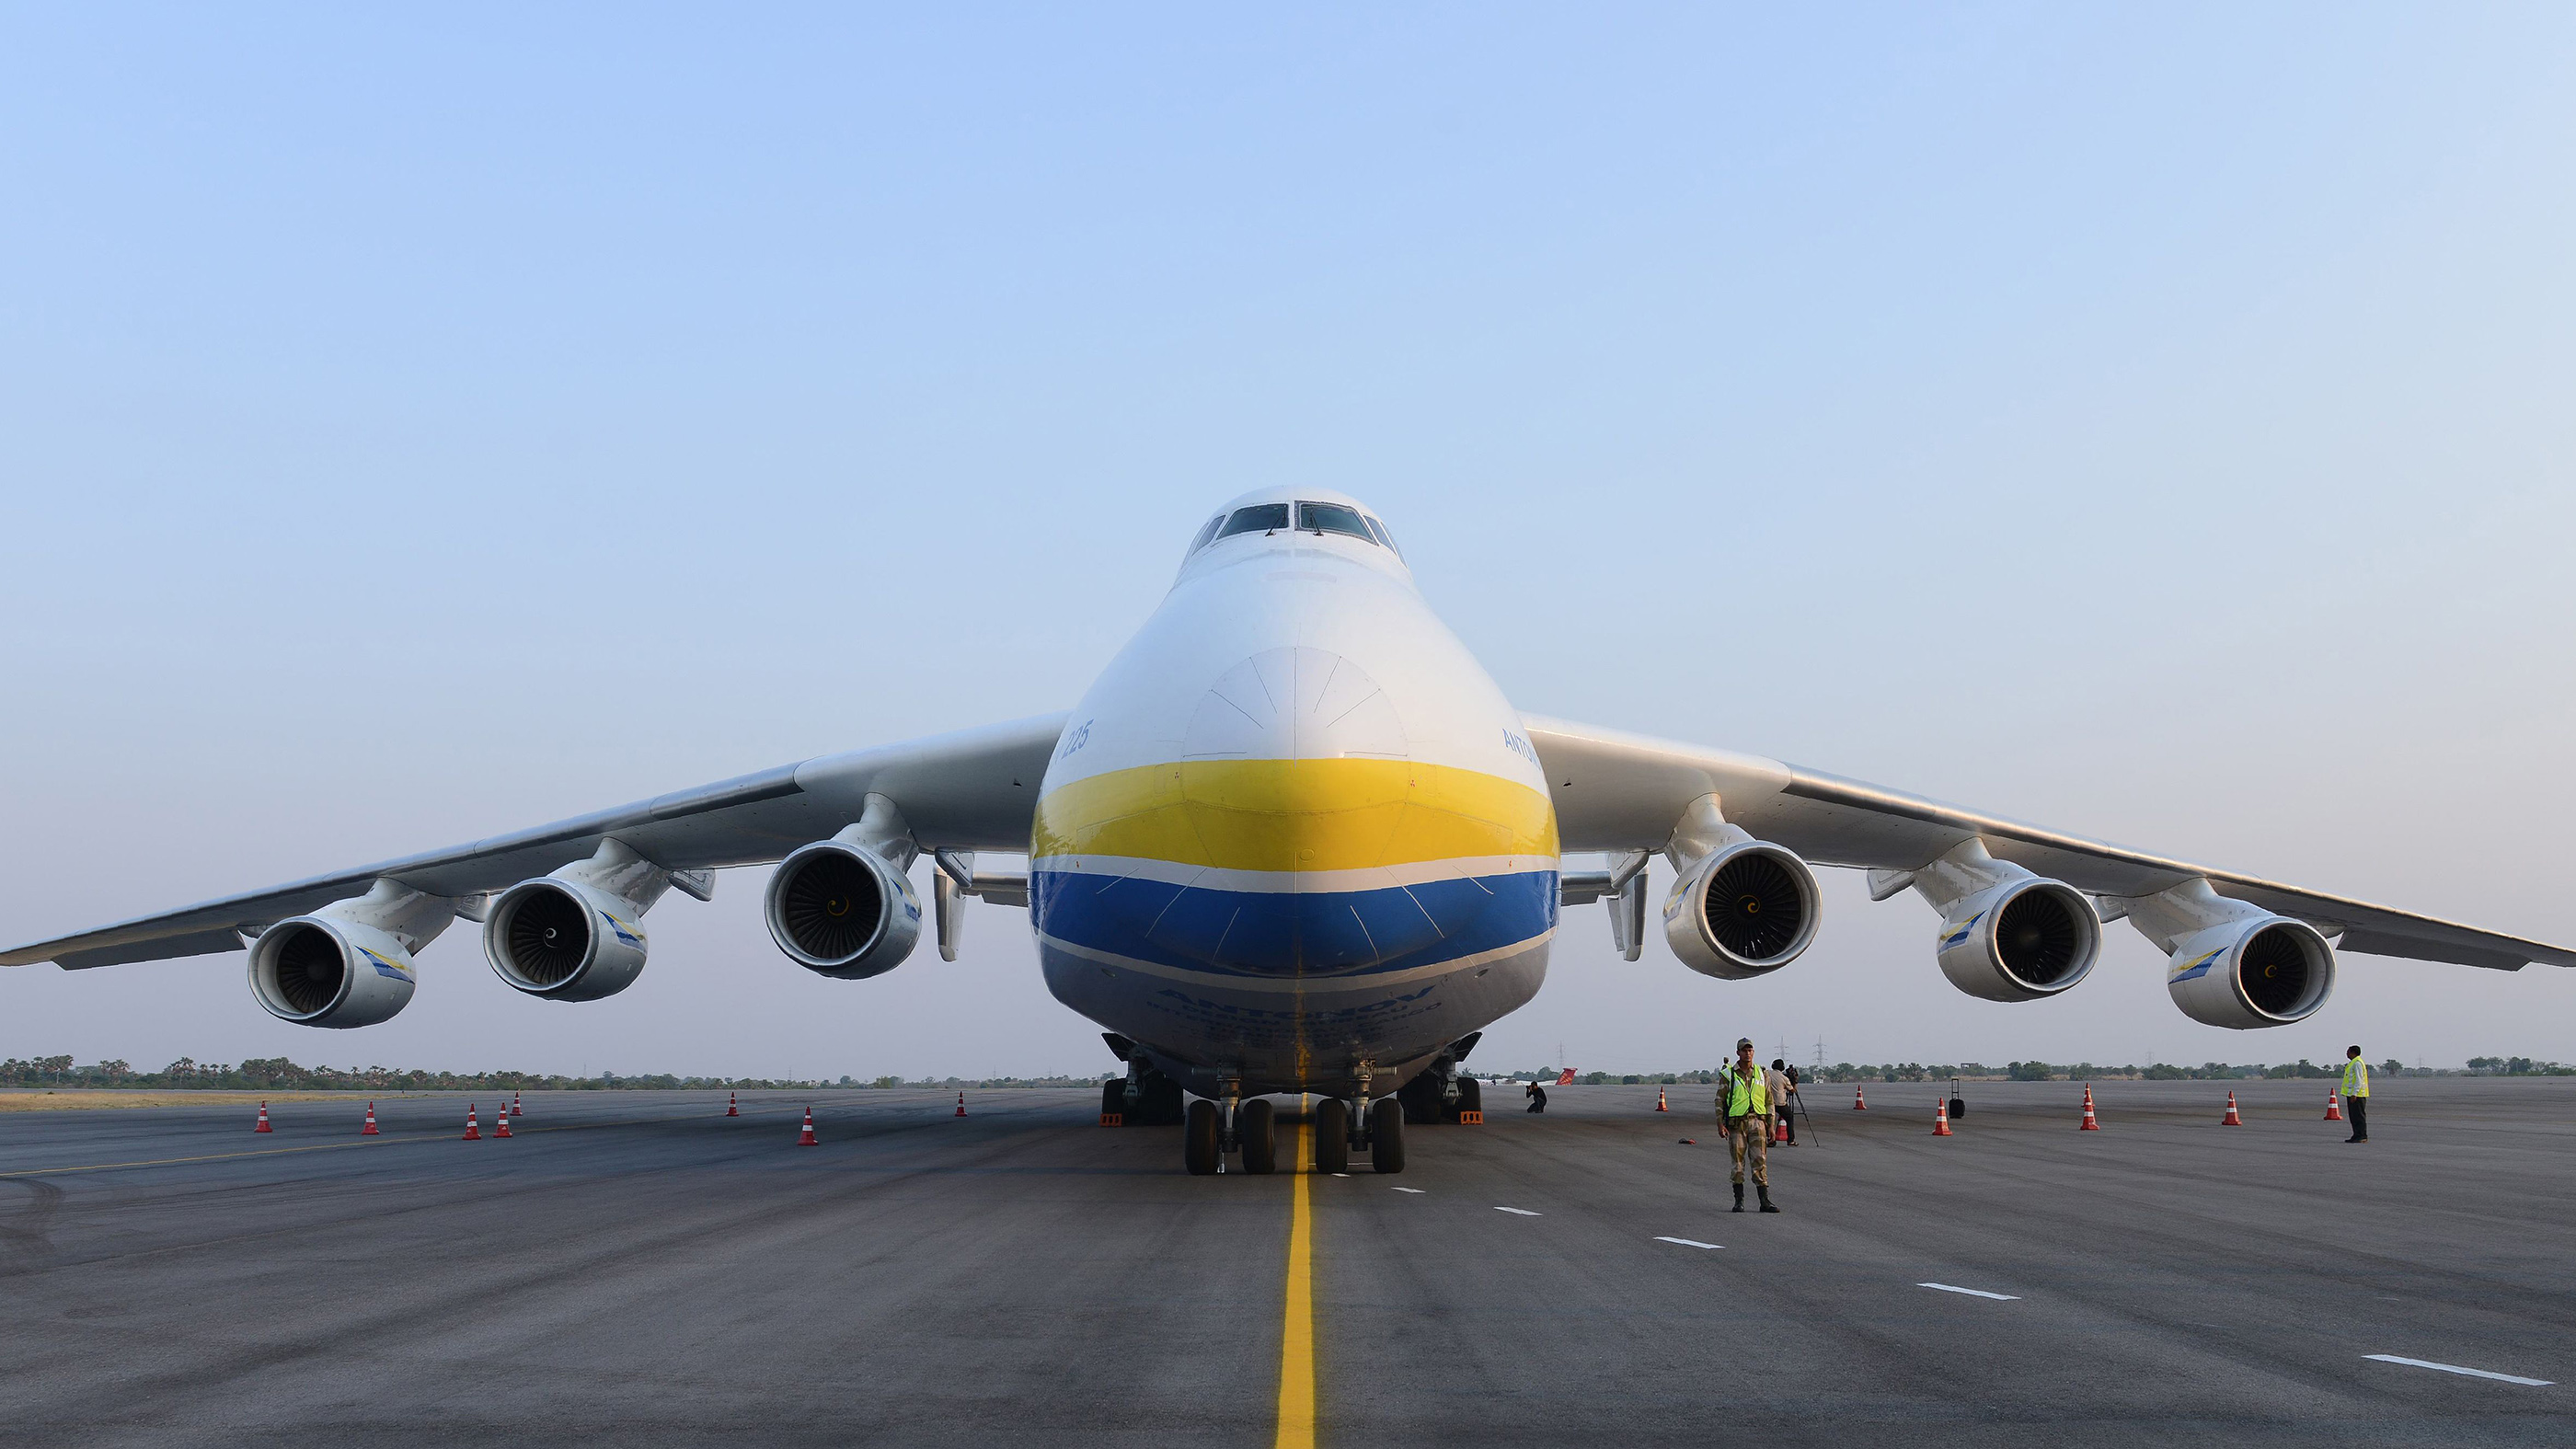 World's largest aircraft feared destroyed after Russian attack on Ukrainian airfield thumbnail